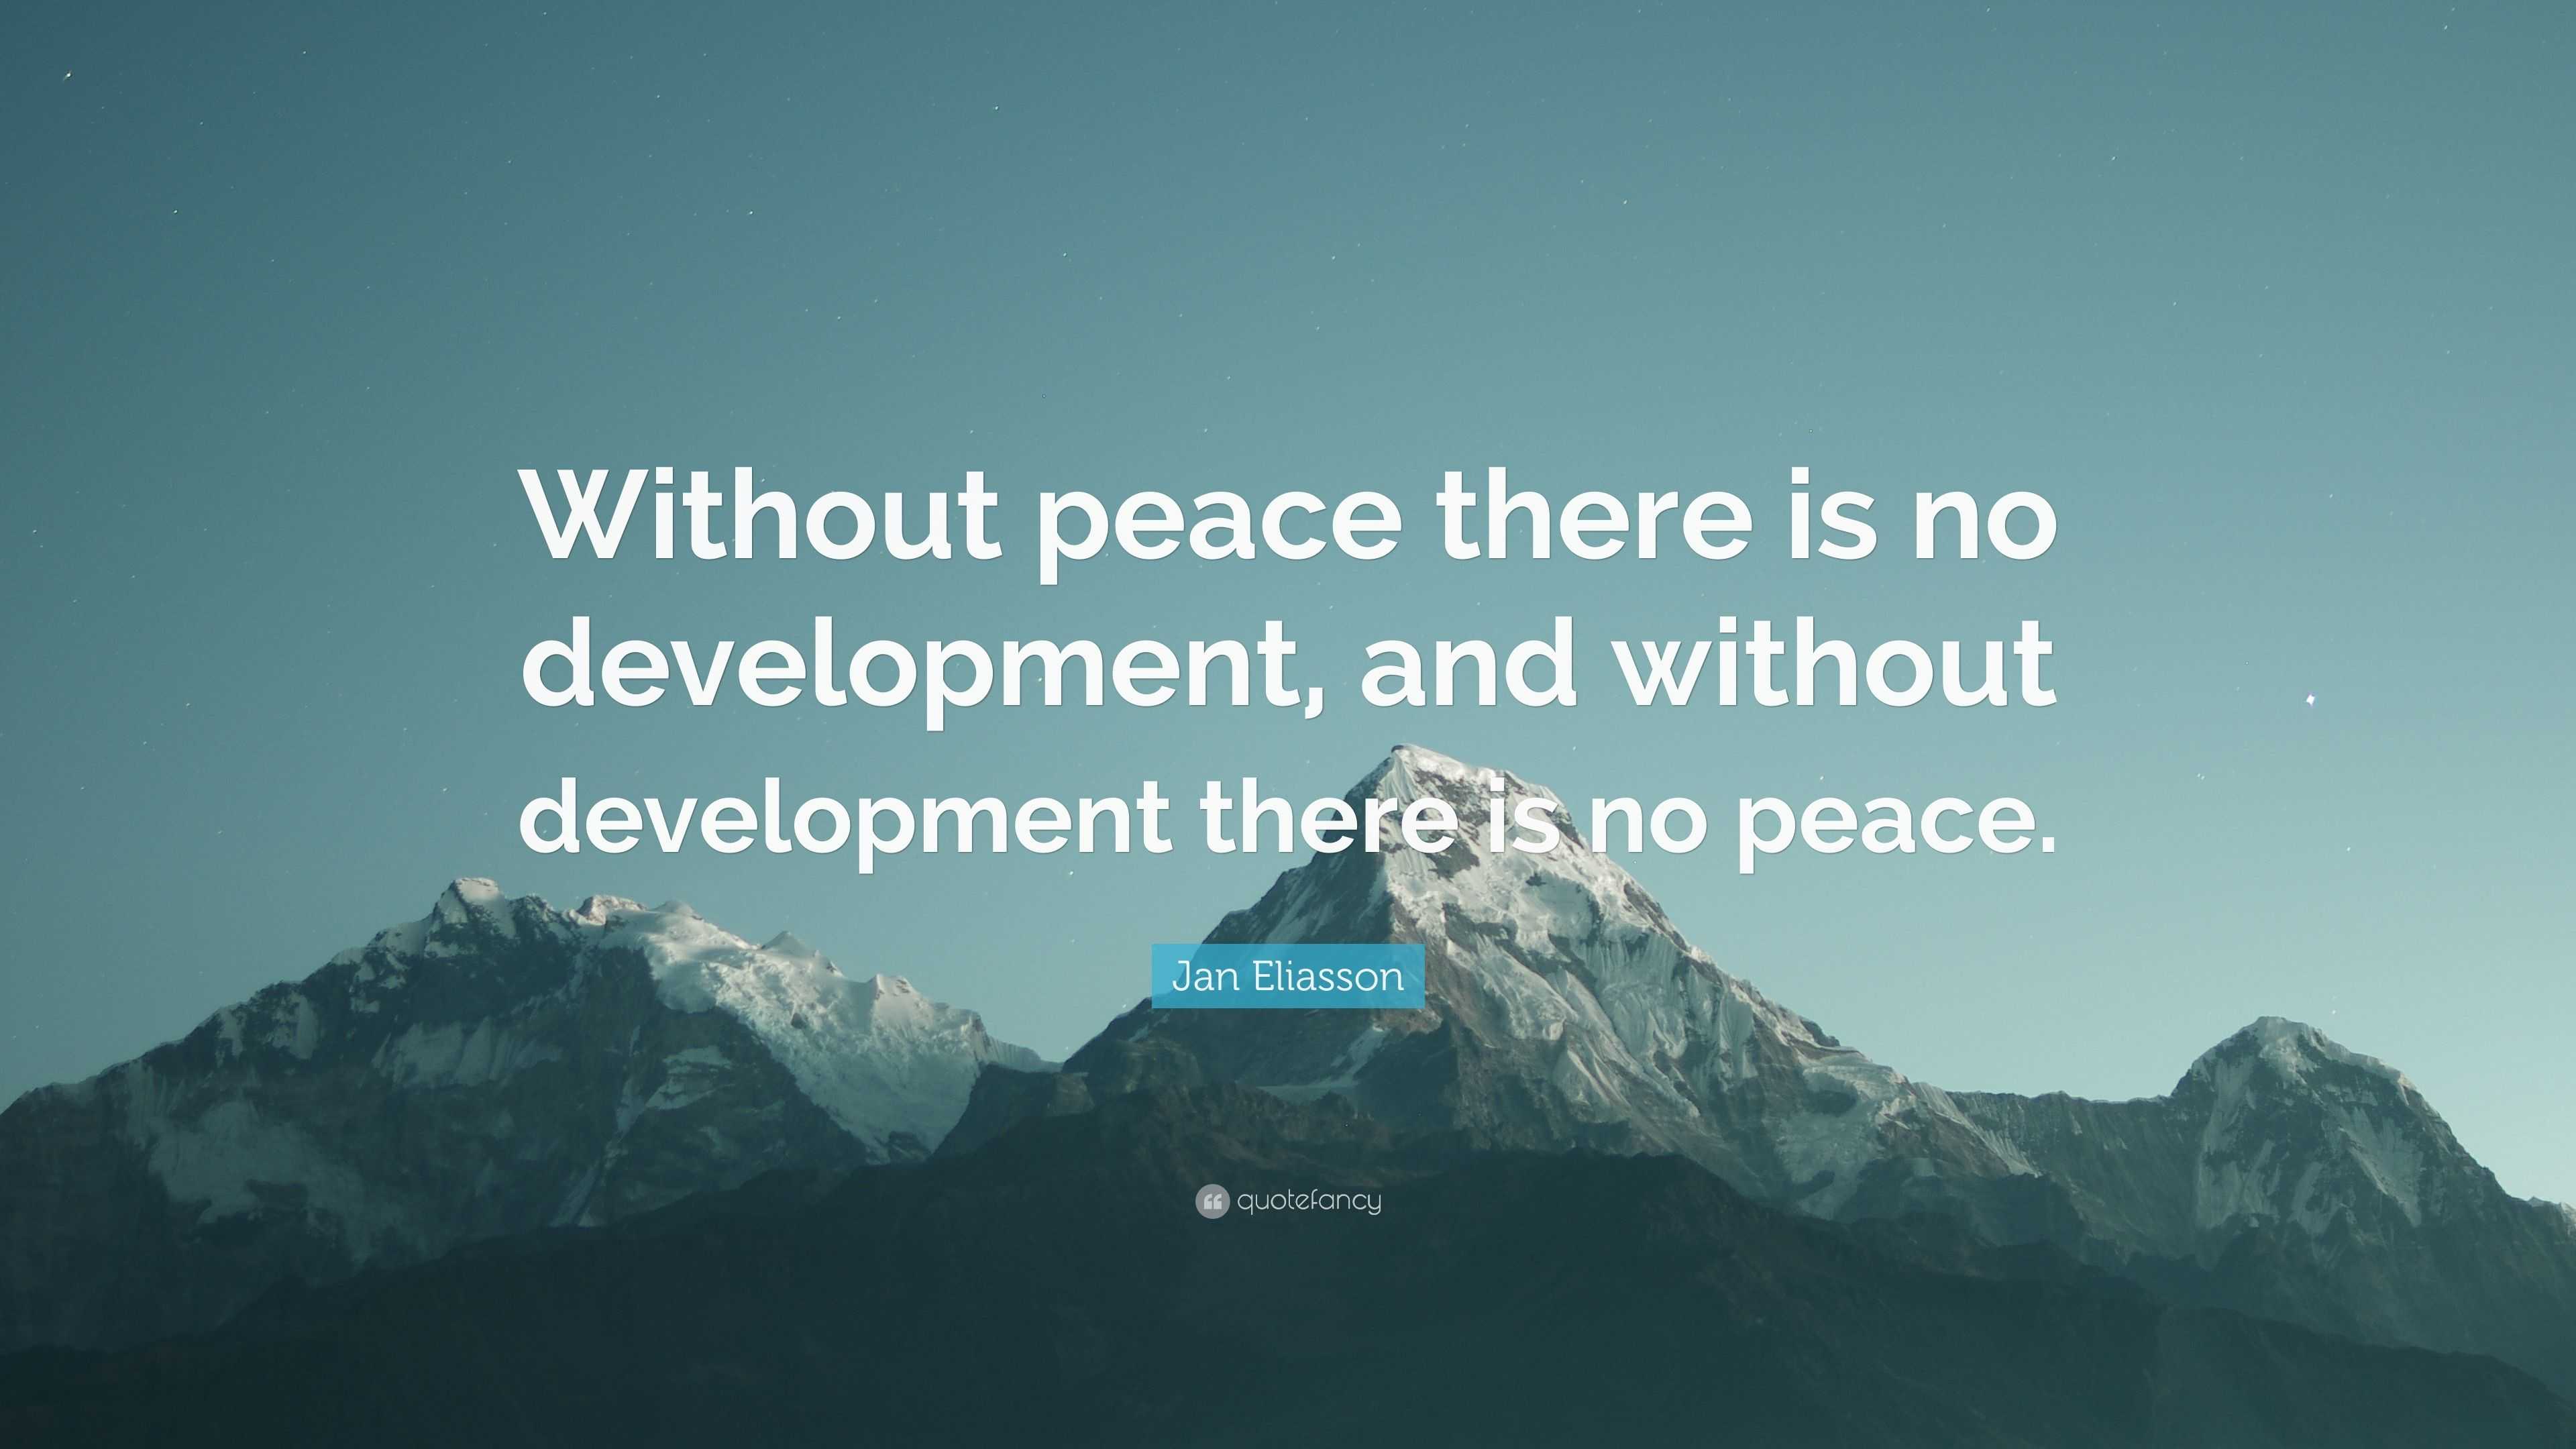 Jan Eliasson Quote: “Without peace there is no development, and without ...